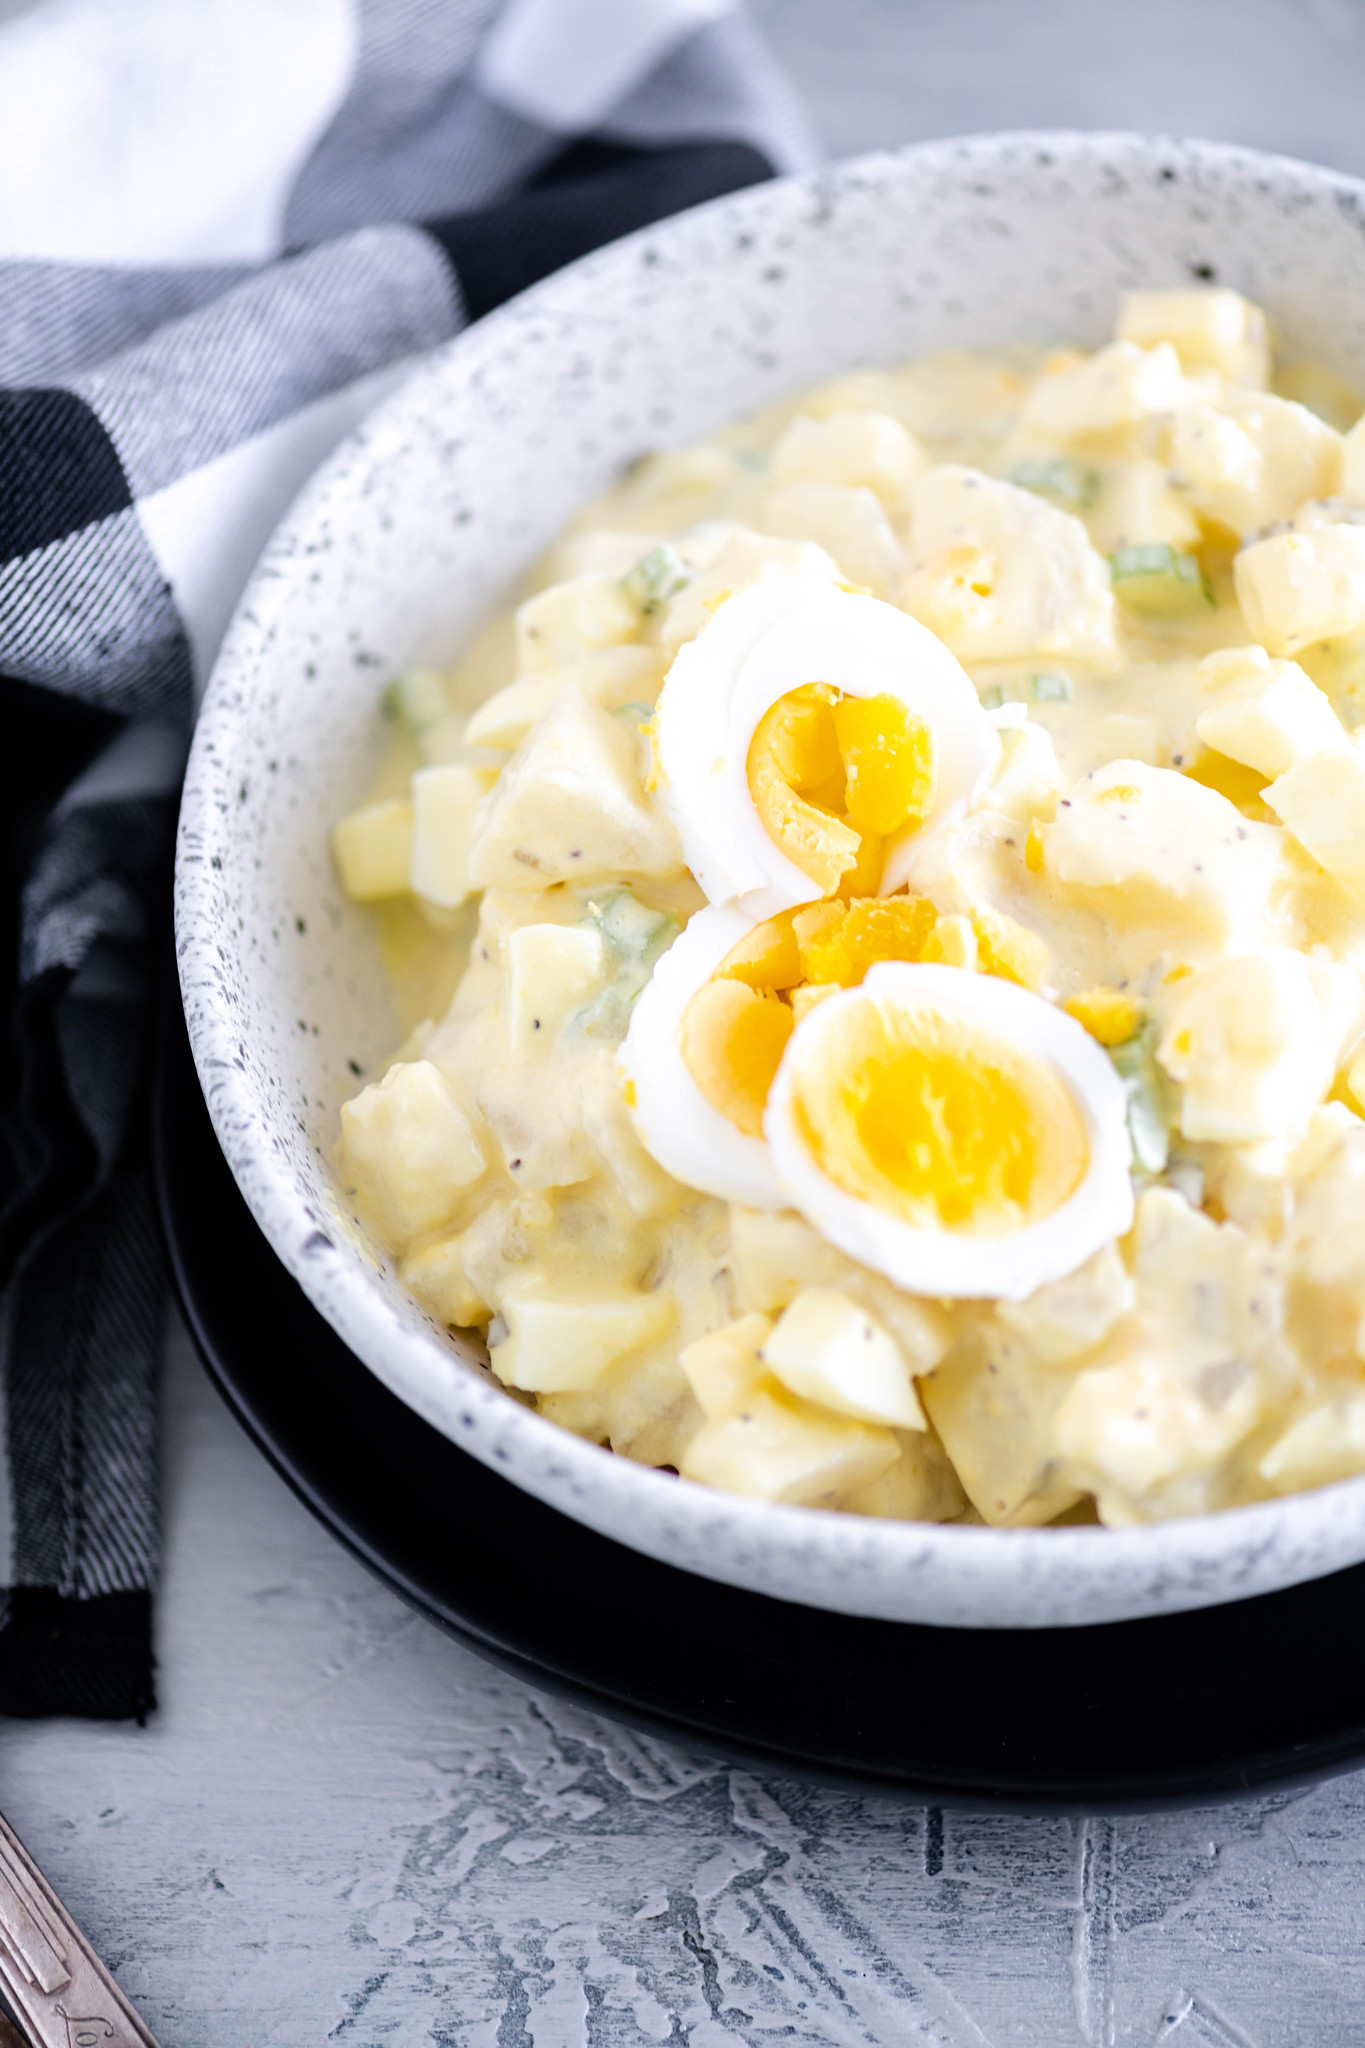 Potato salad in a white bowl with black speckles.